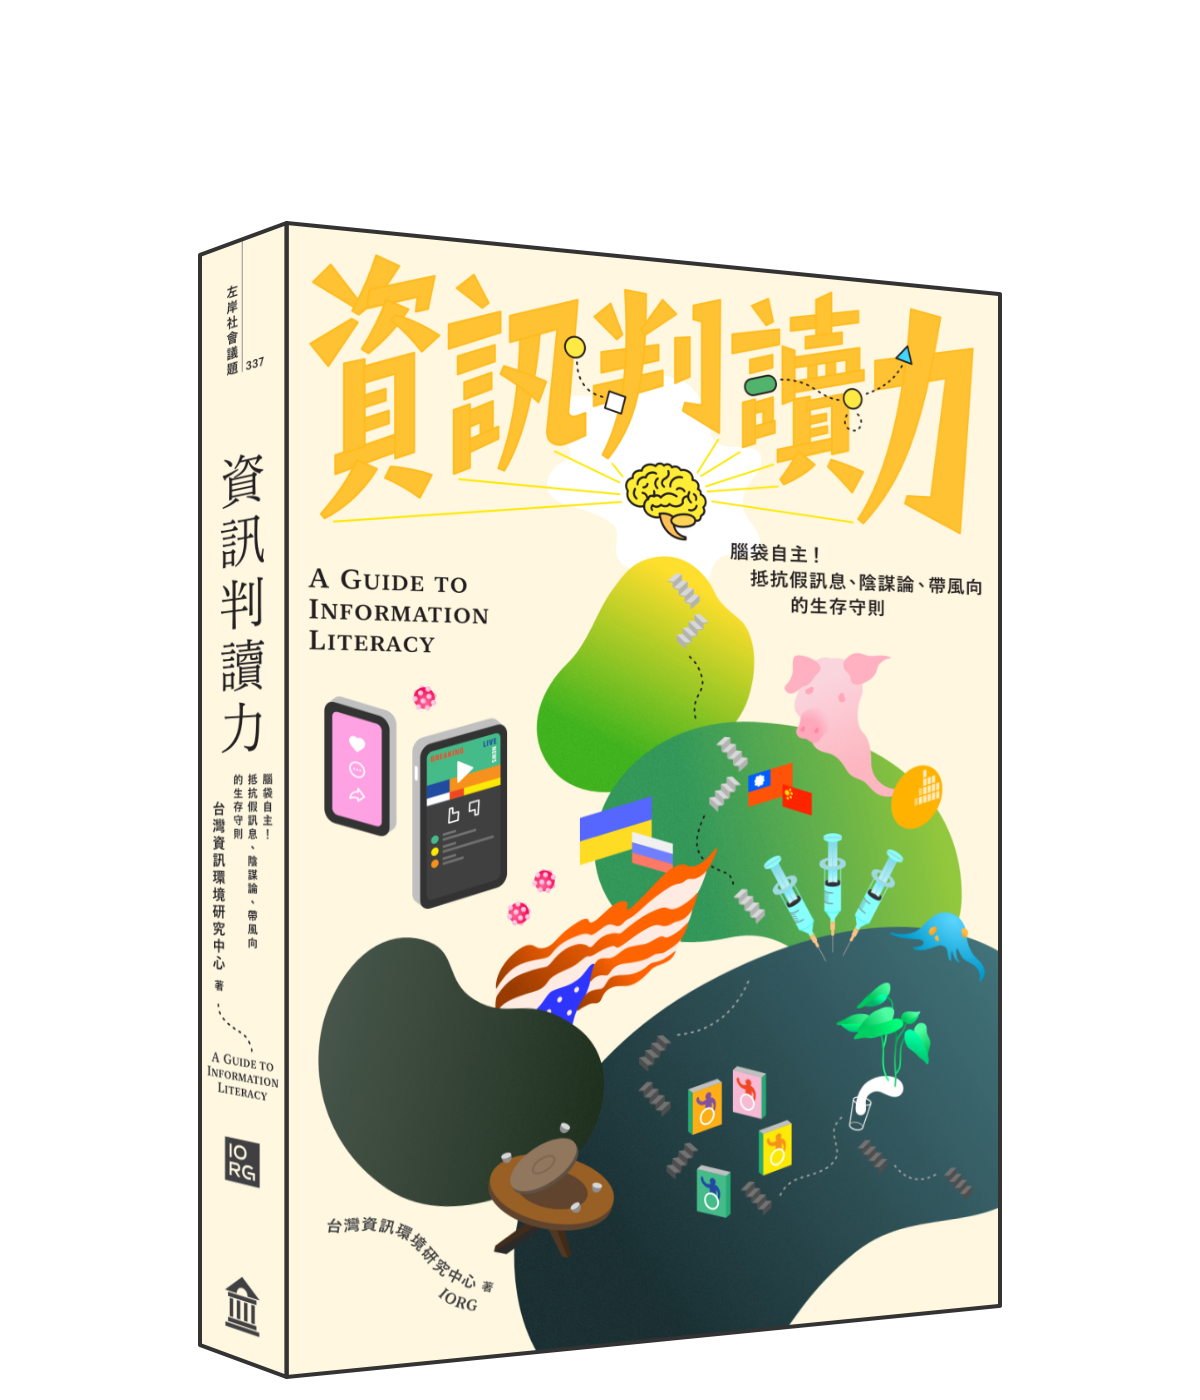 A Guide to Information Literacy：Exploration and Survival in Taiwan’s Information Environment